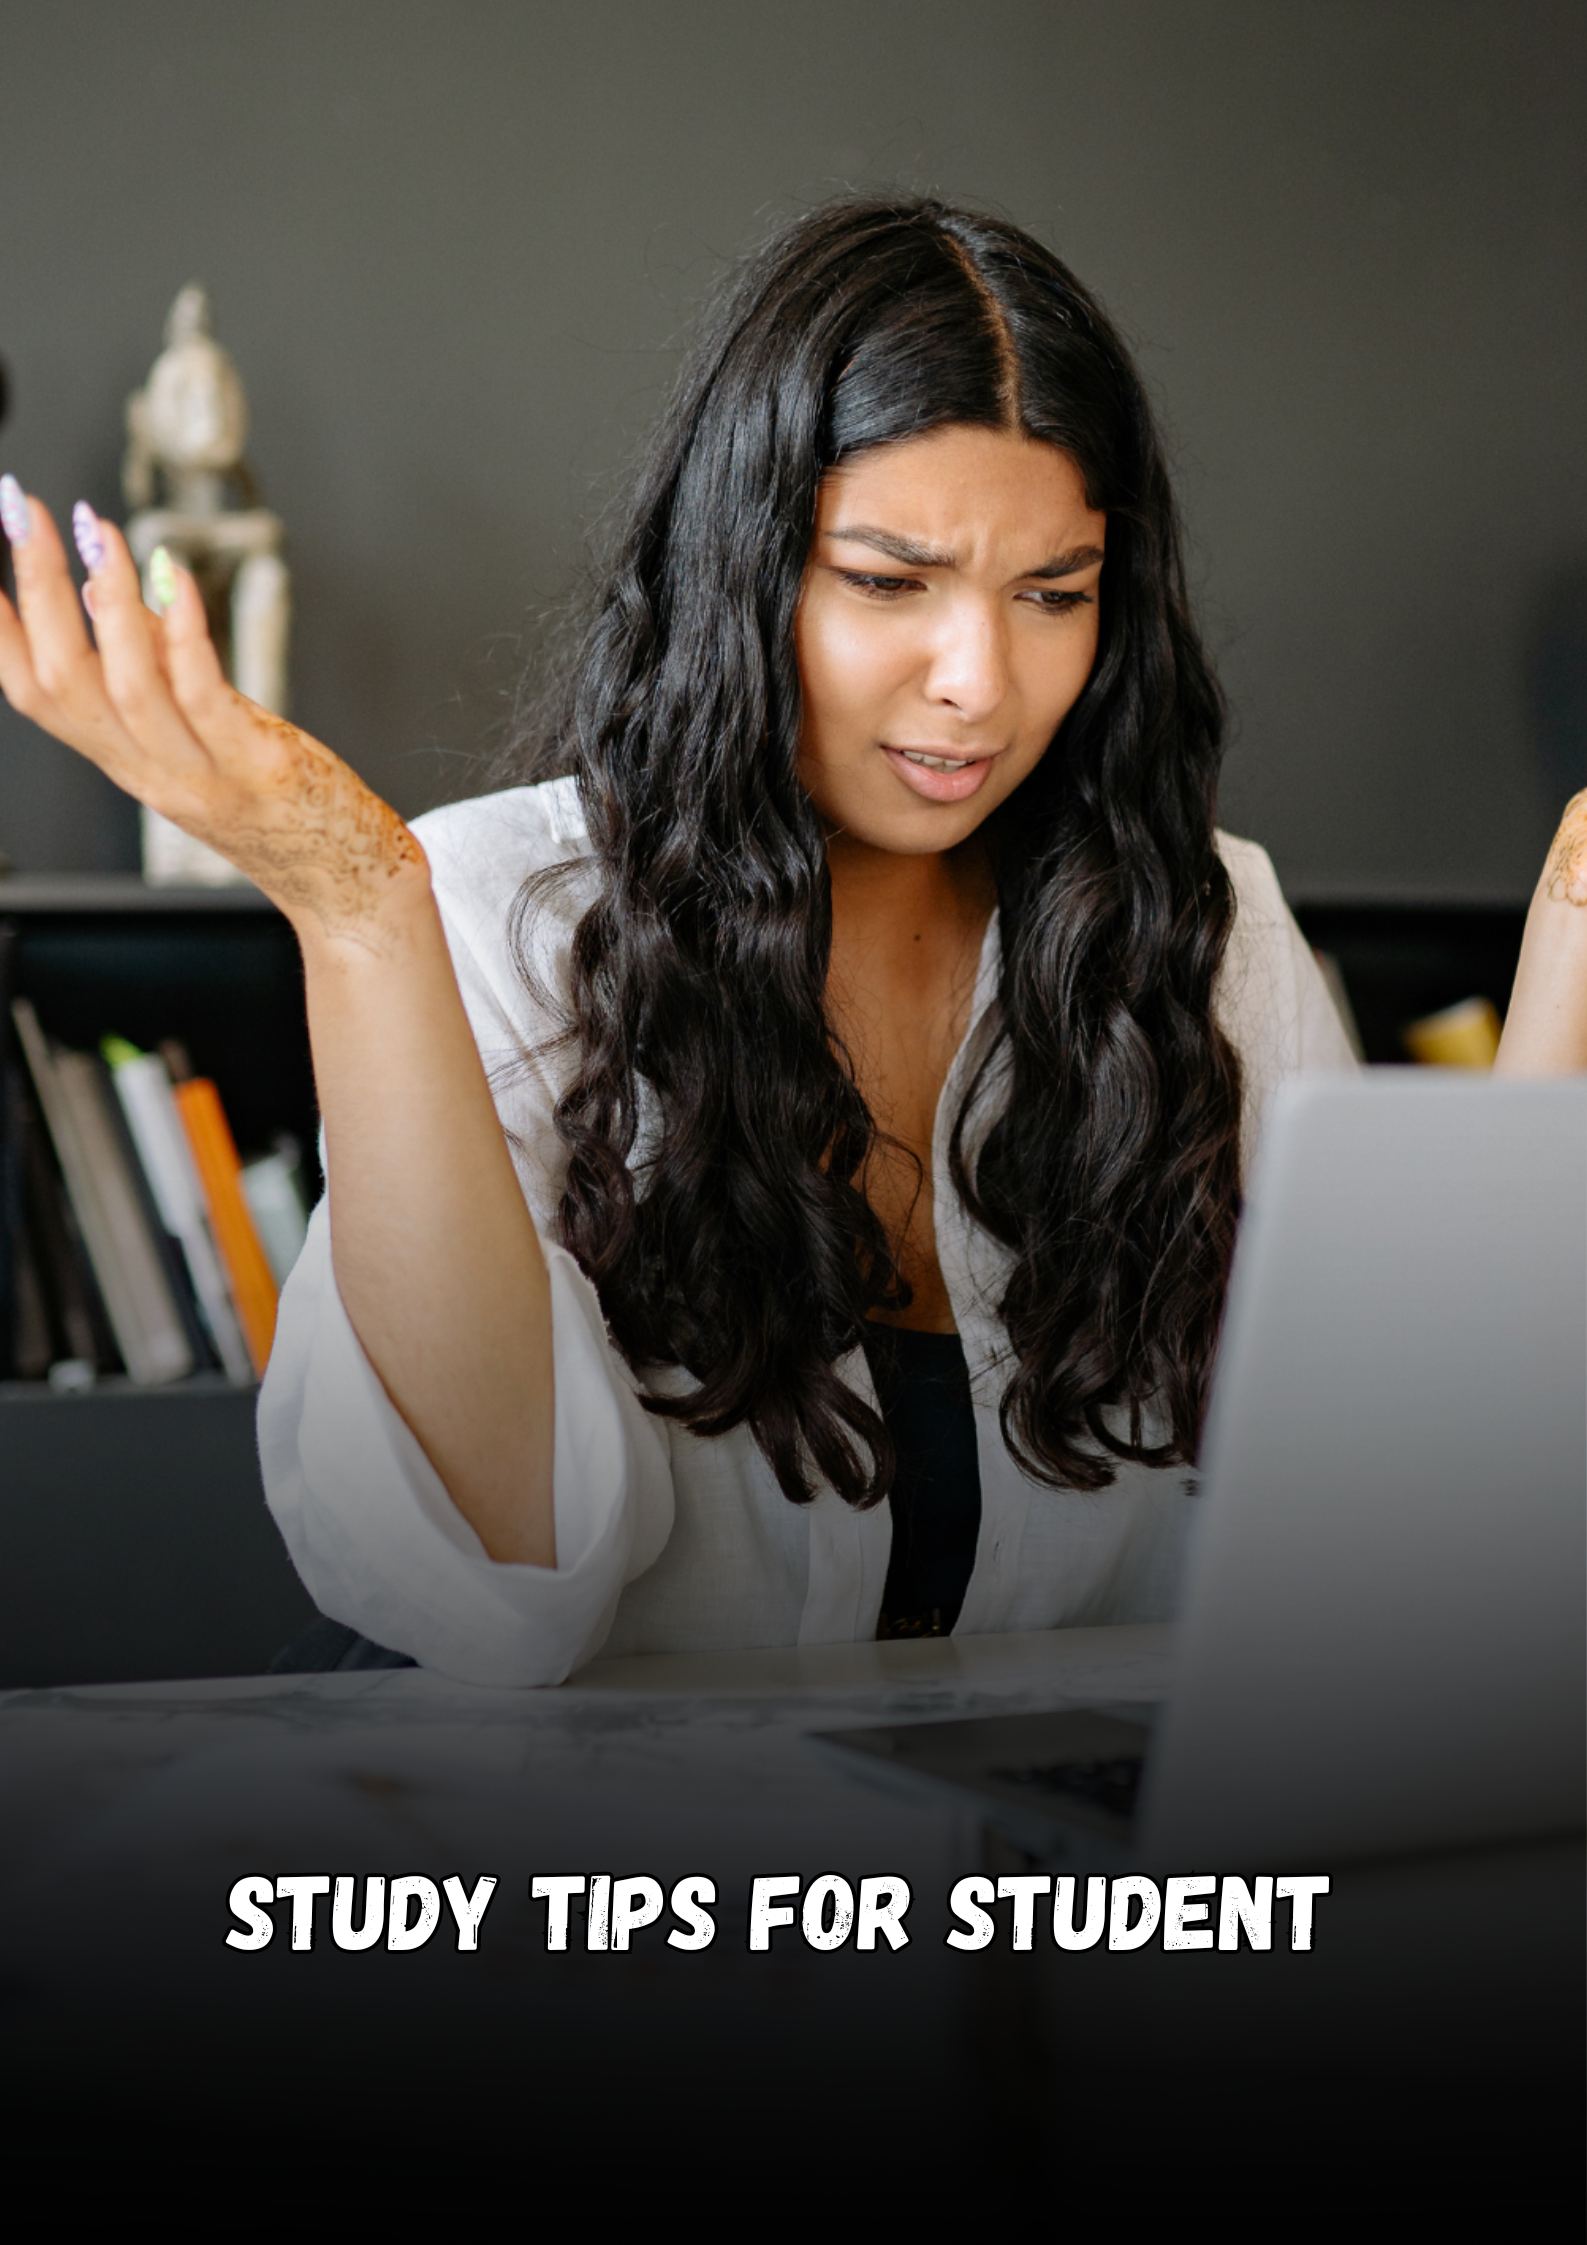 Study tips for student